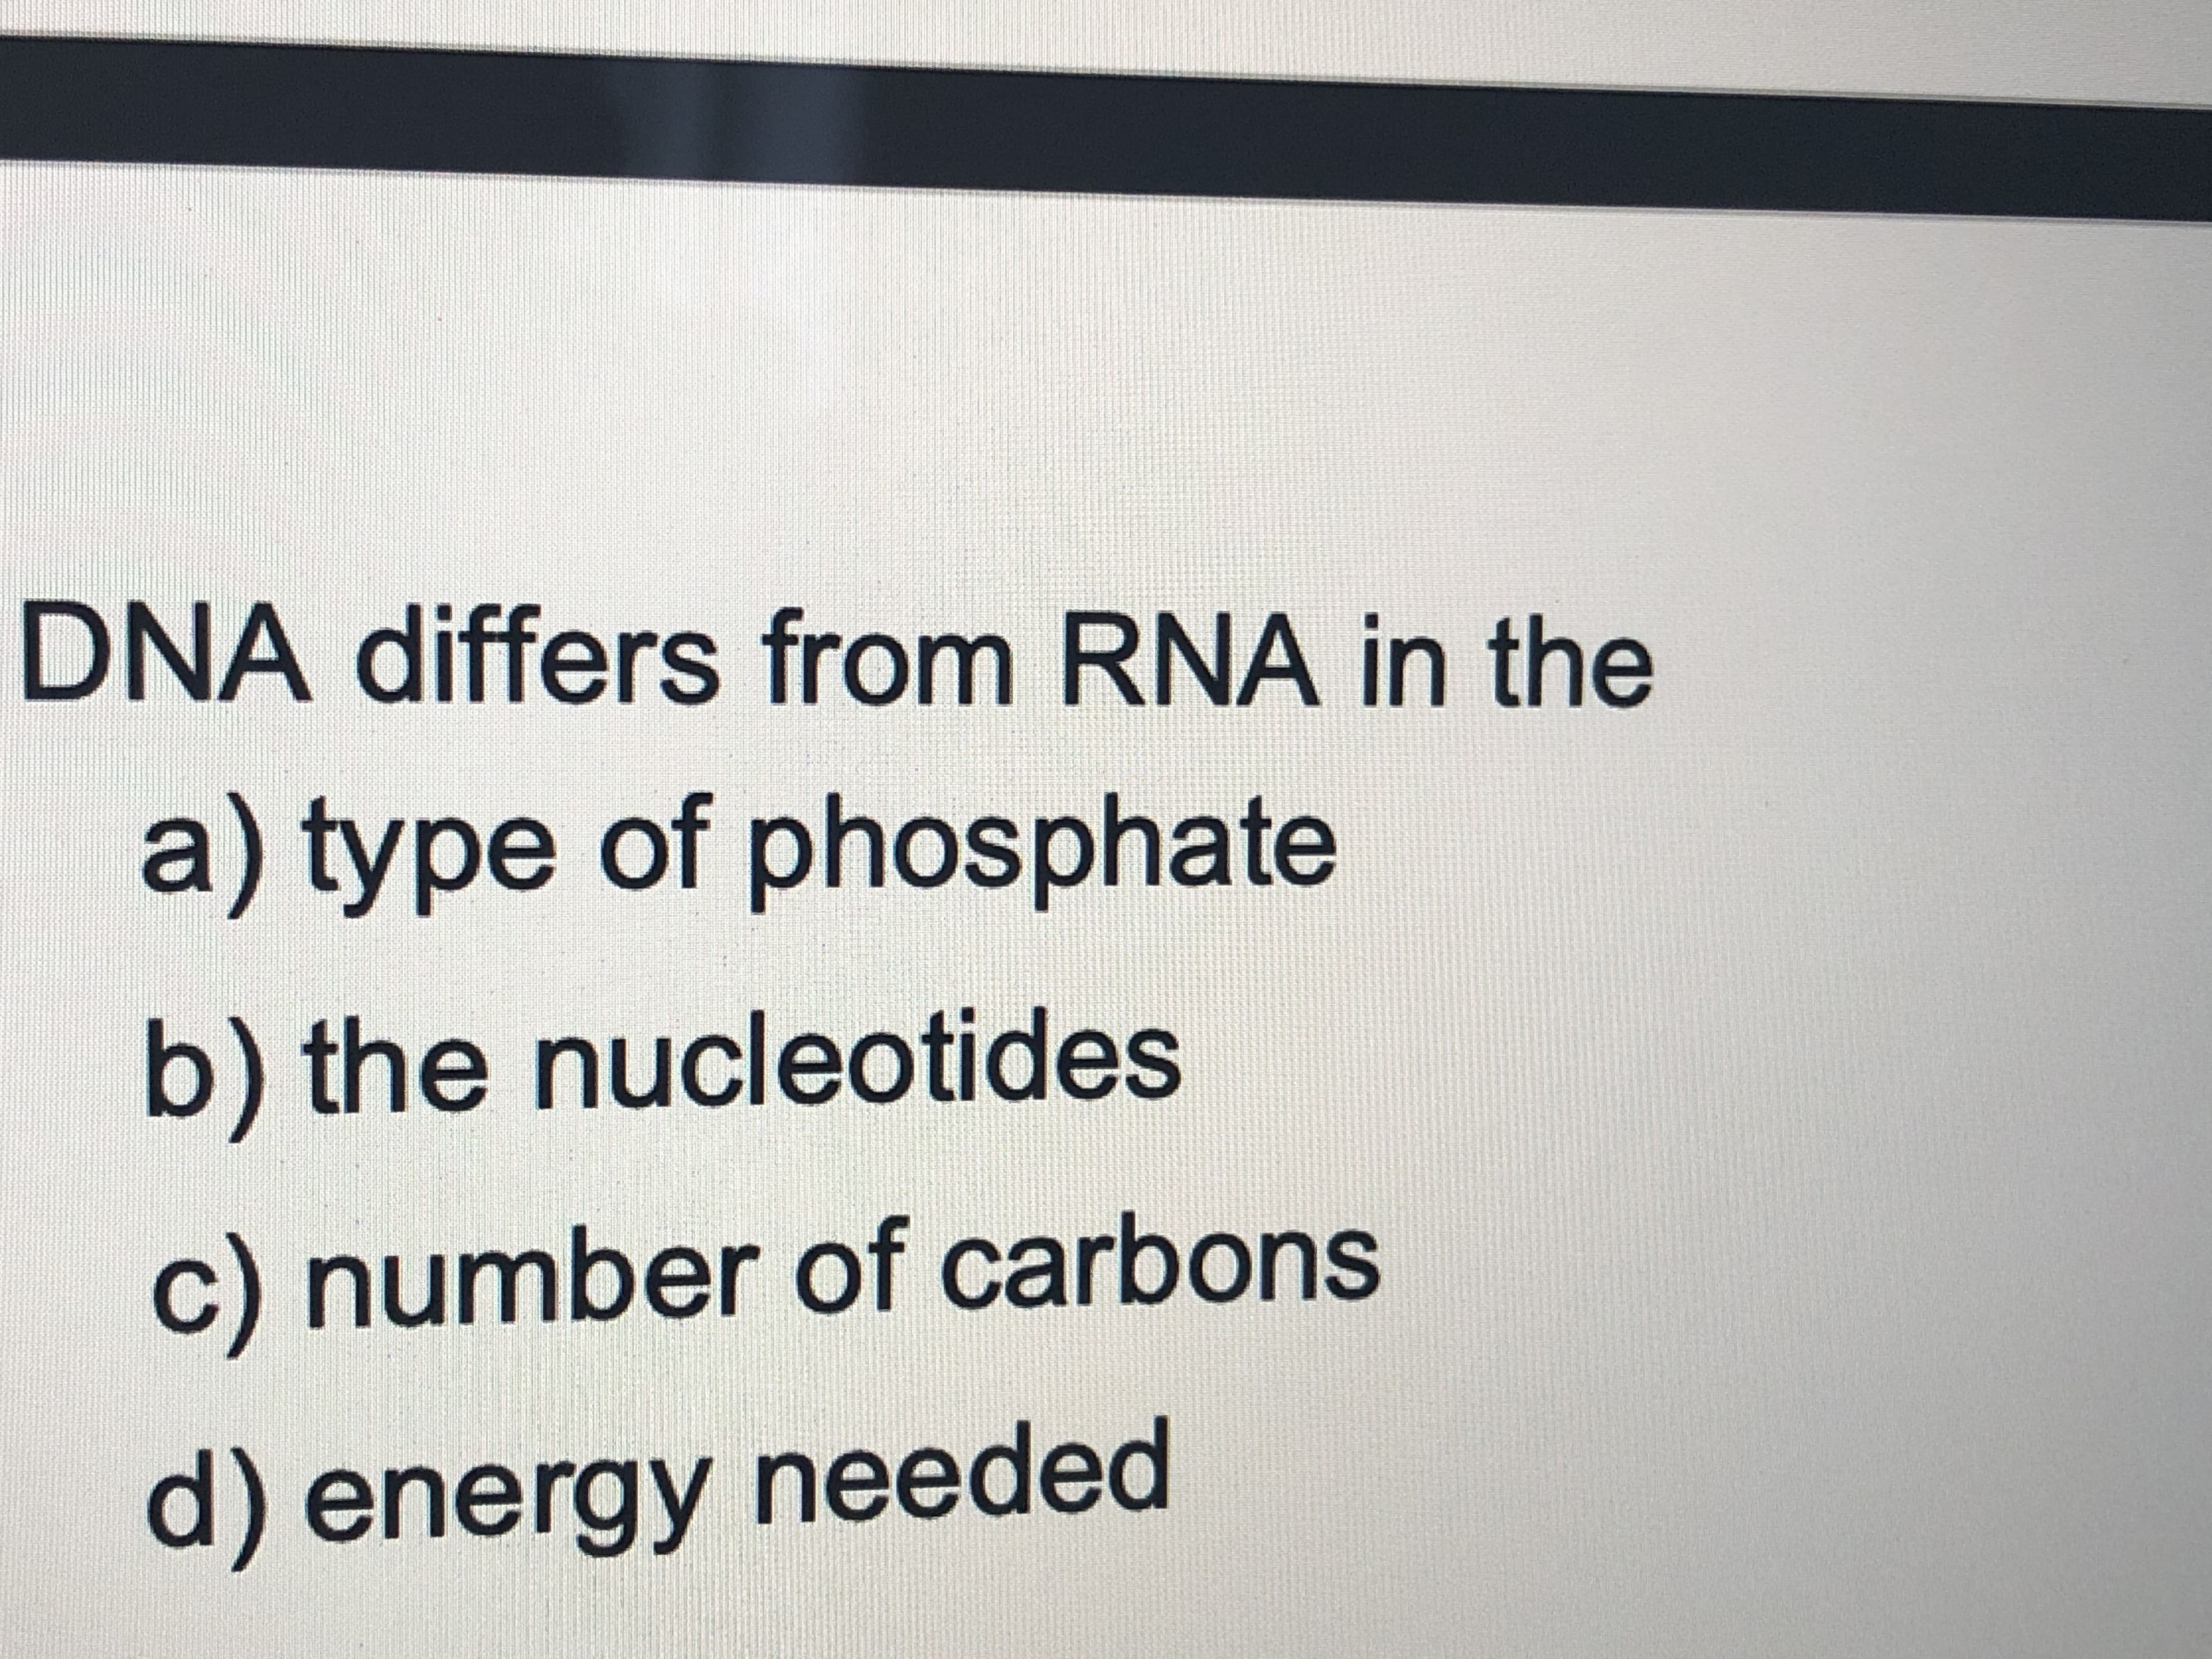 DNA differs from RNA in the
s troi
a) type of phosphate
b) the nucleotides
c) number of carbons
d) energy needed
у пее
